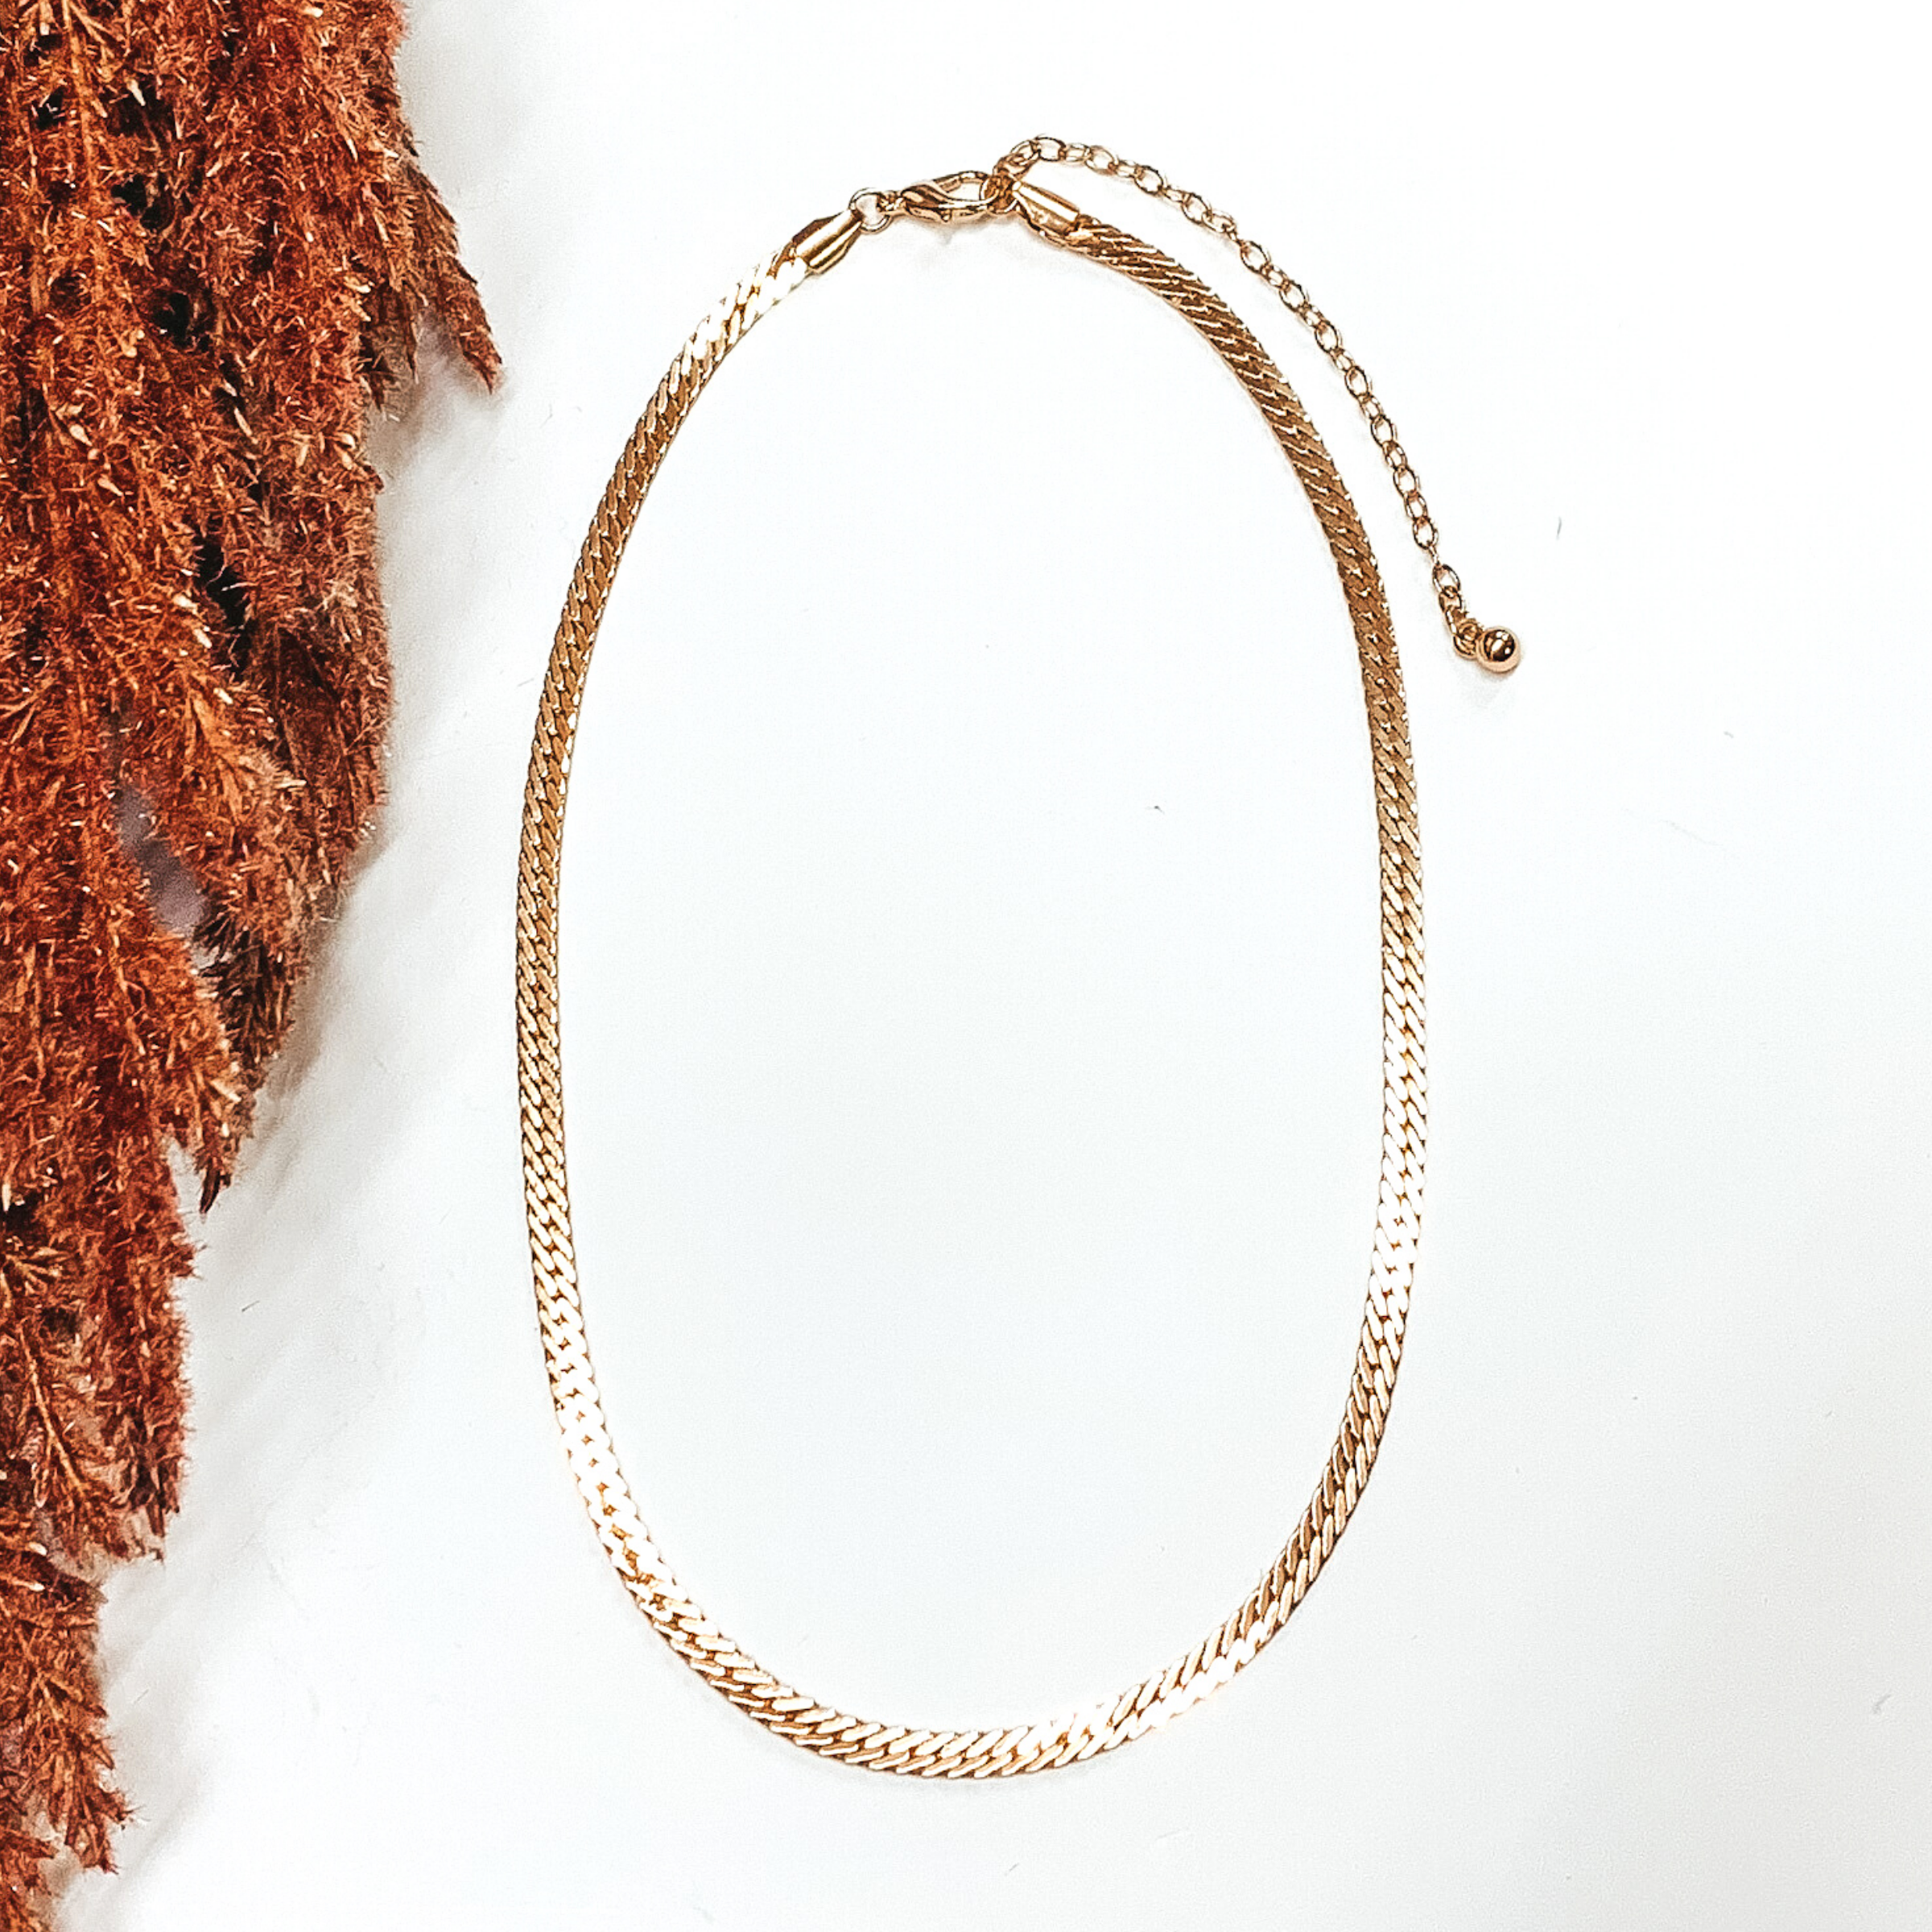 Simple flat snake chain necklace in gold. This necklace is pictured on a white background with brown floral on the side of the pic.